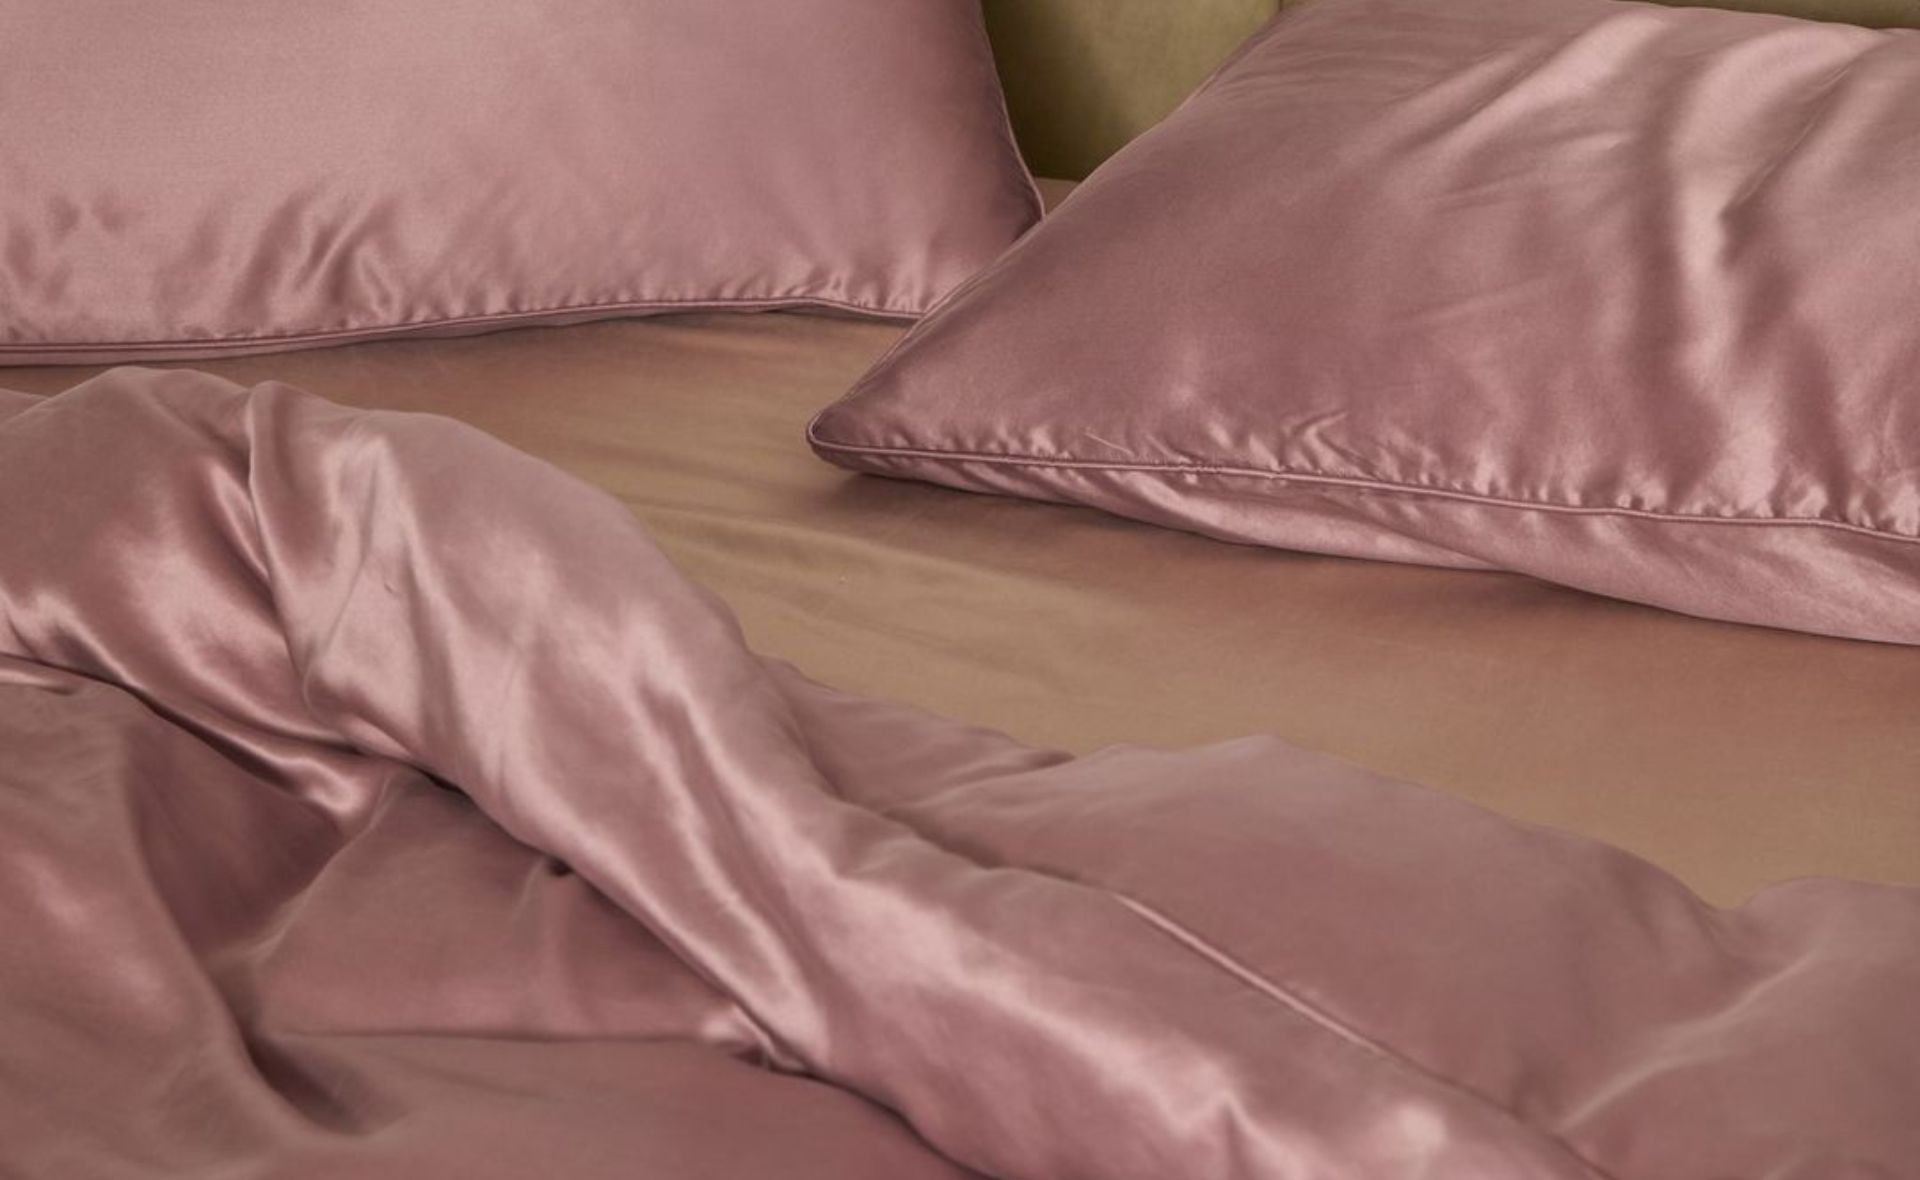 Slip into sweet dreams with silky soft bed sheets